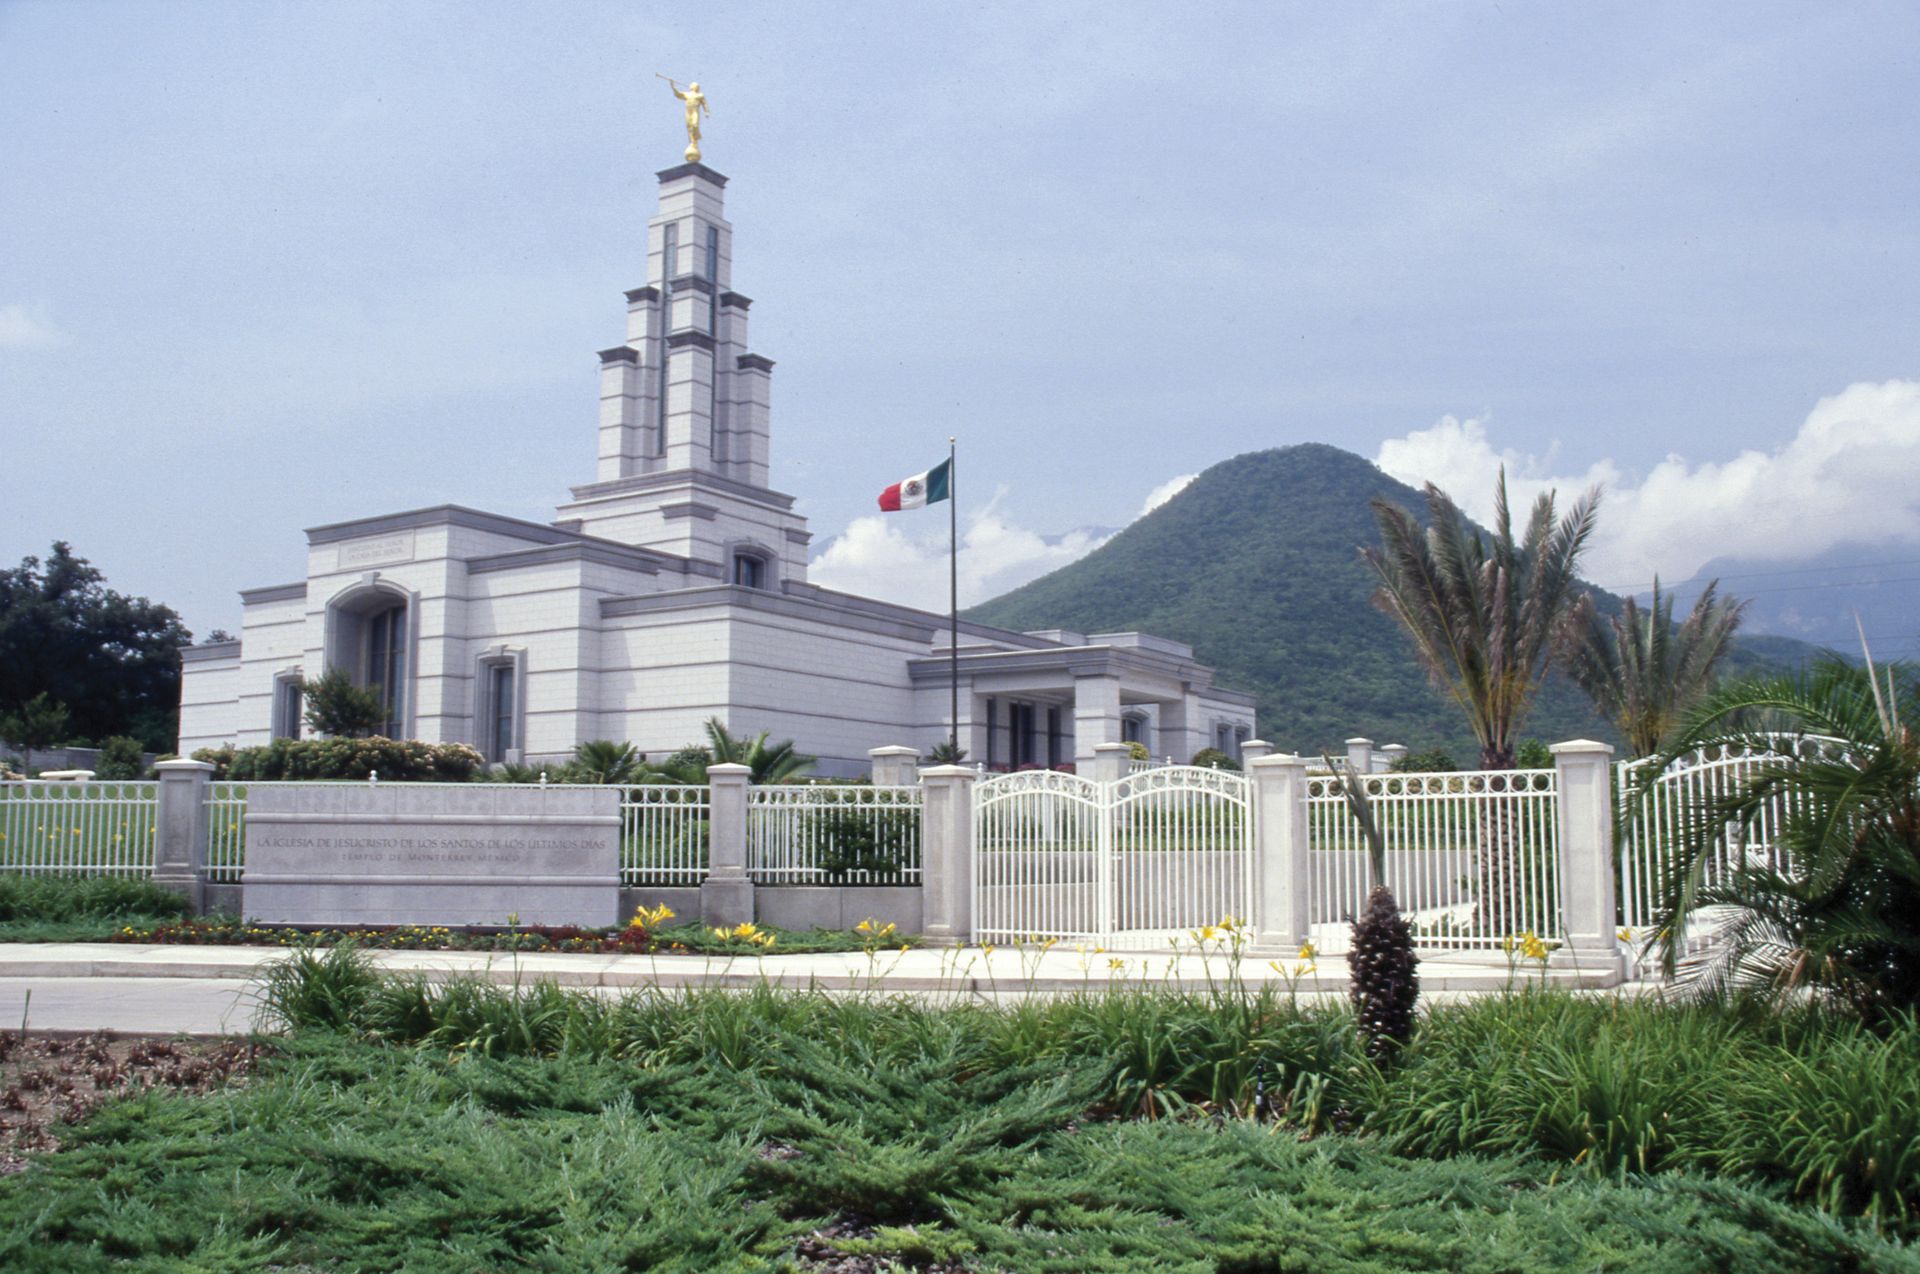 The Monterrey Mexico Temple name sign, including the entrance and scenery.